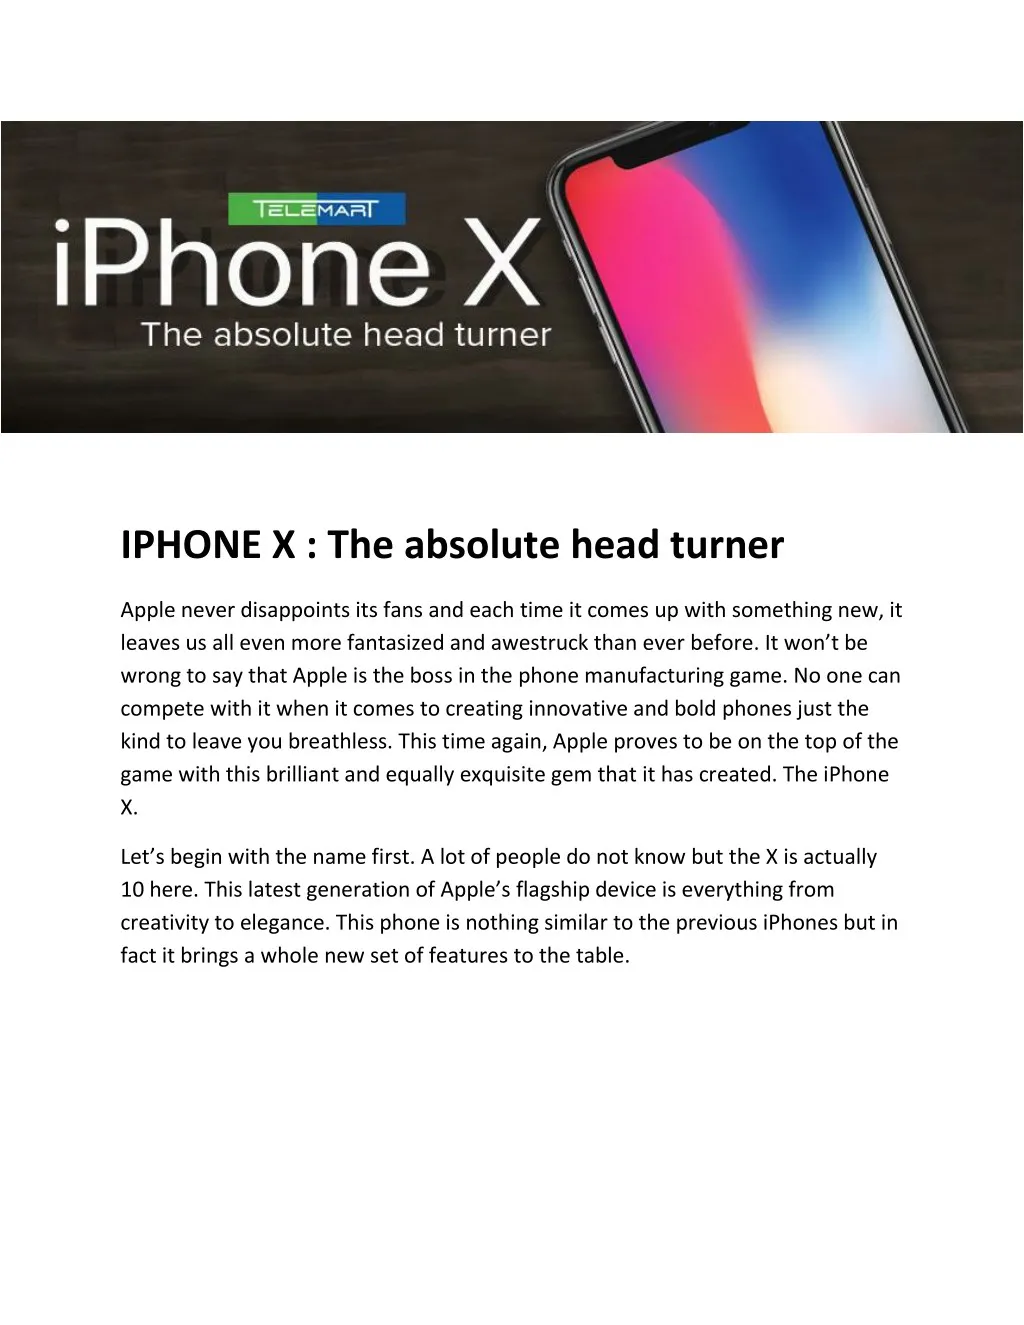 iphone x the absolute head turner